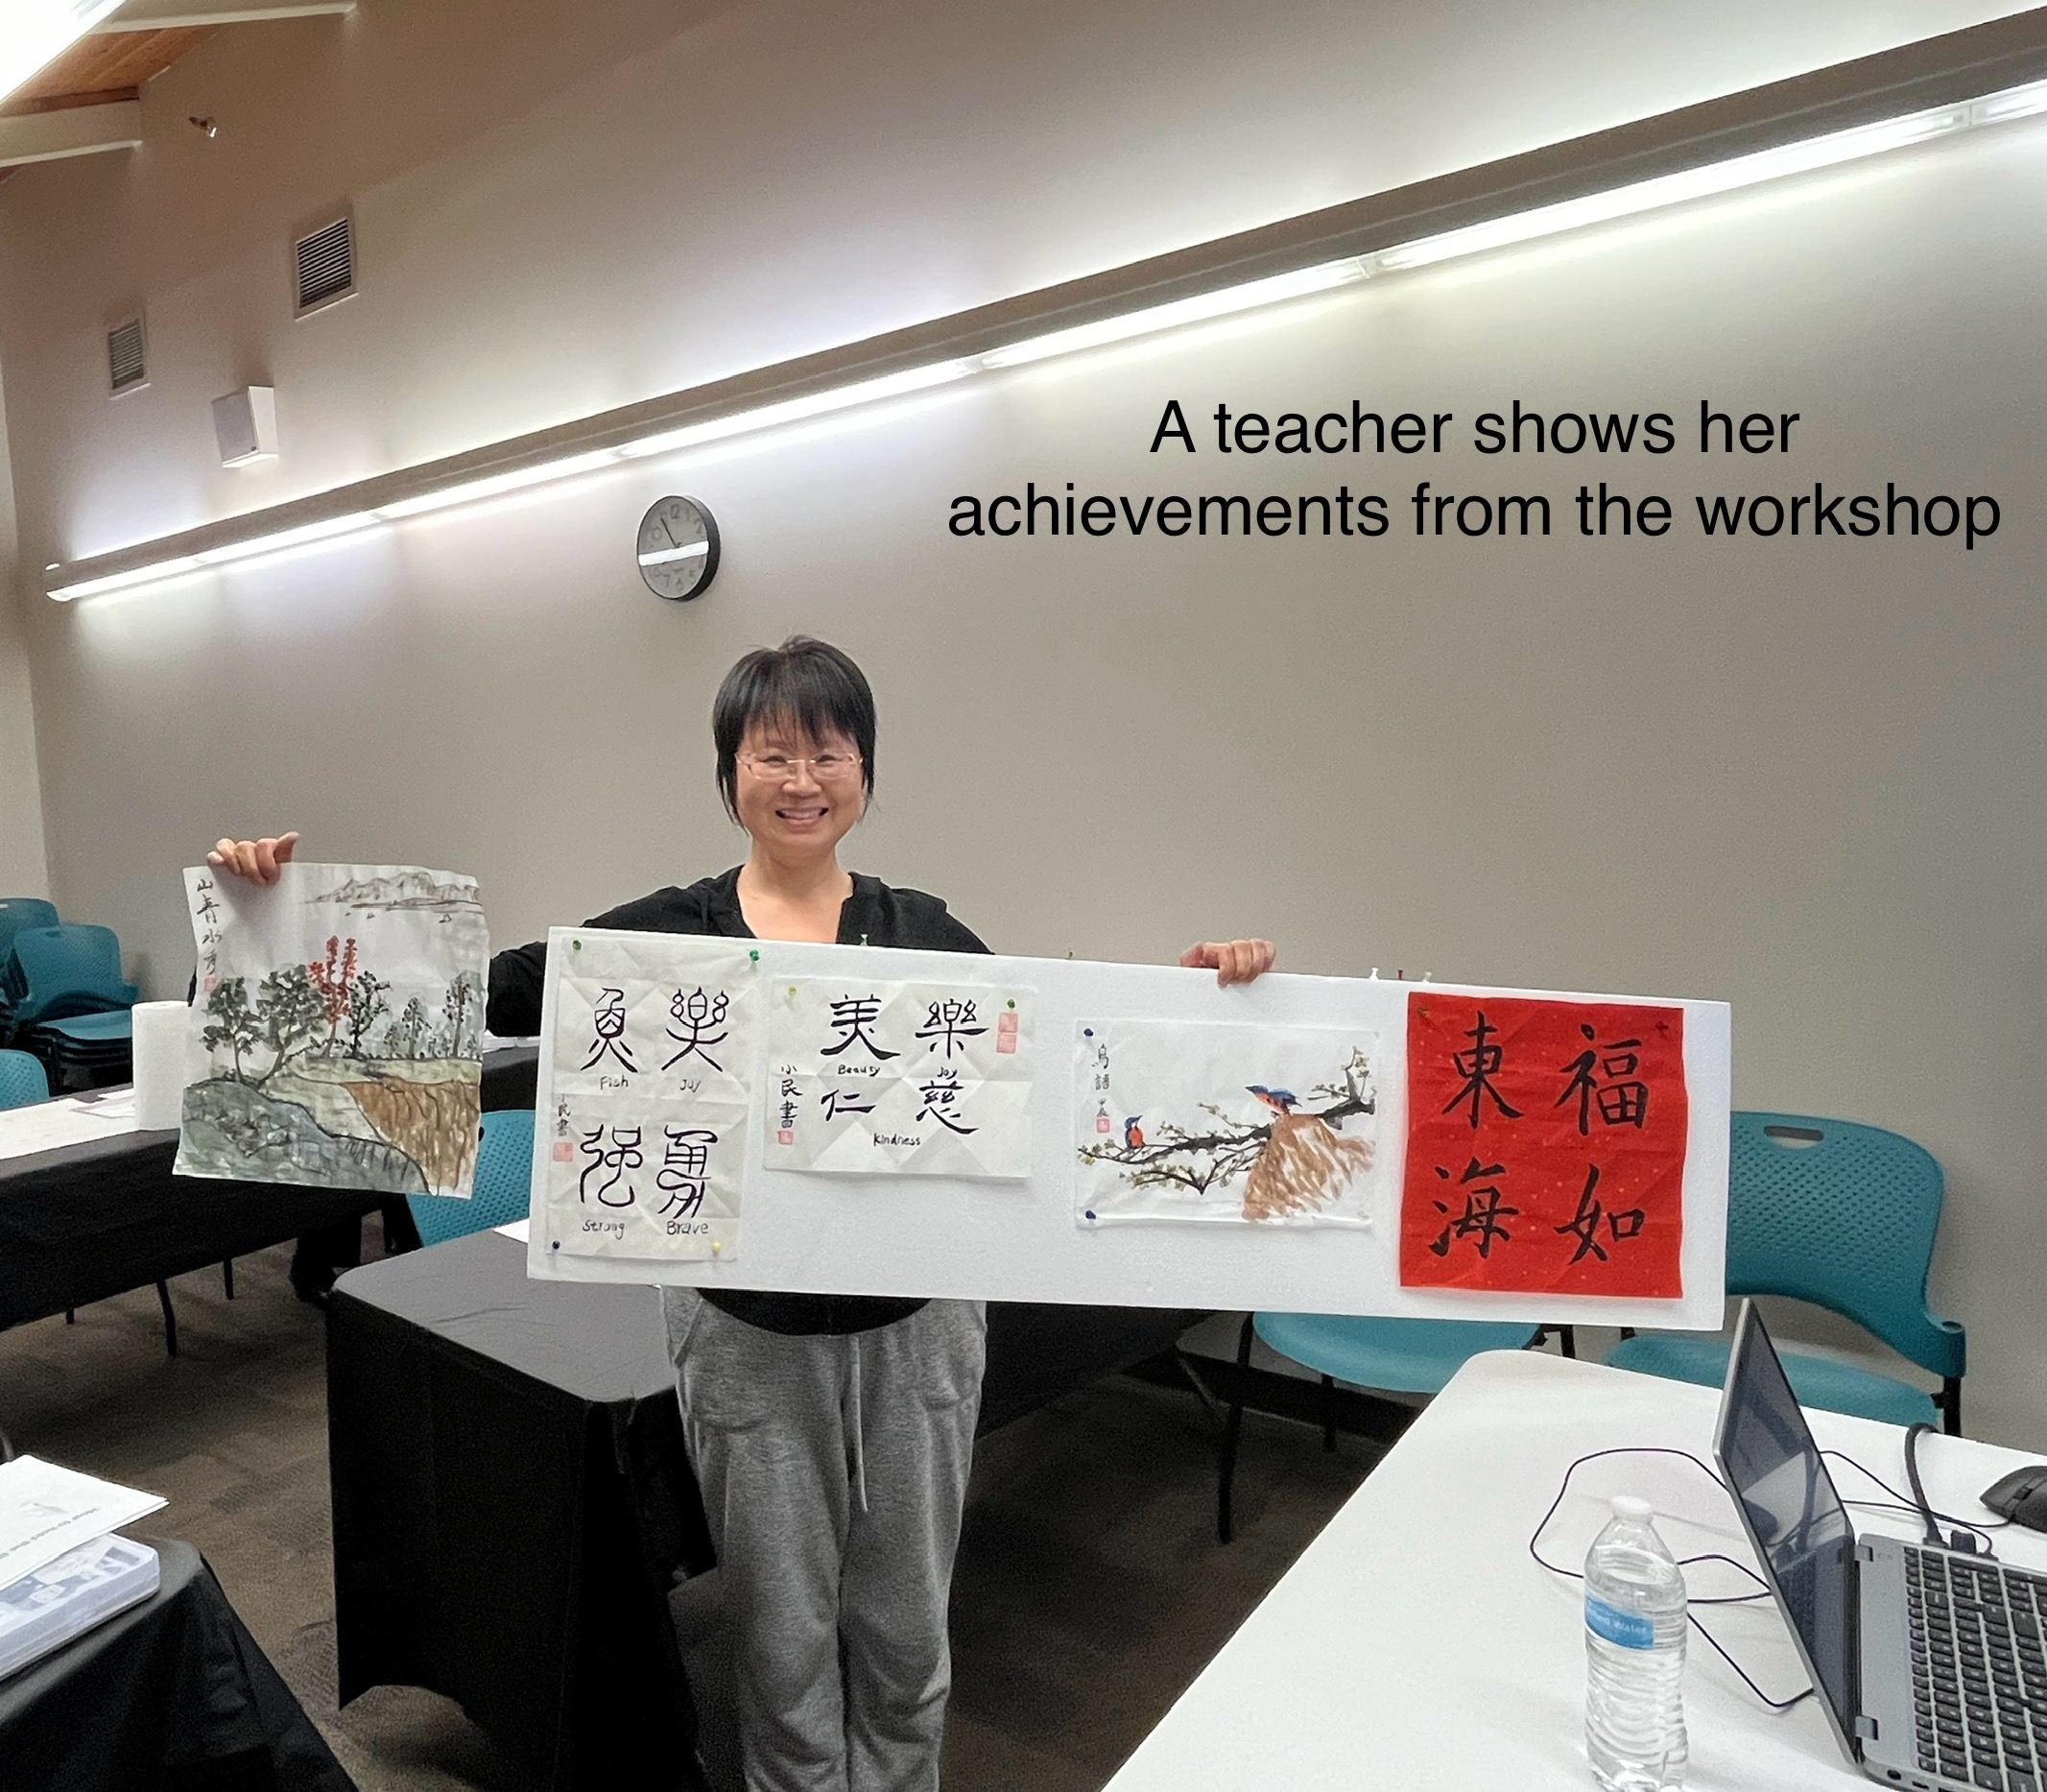 A student shows off her work from the class